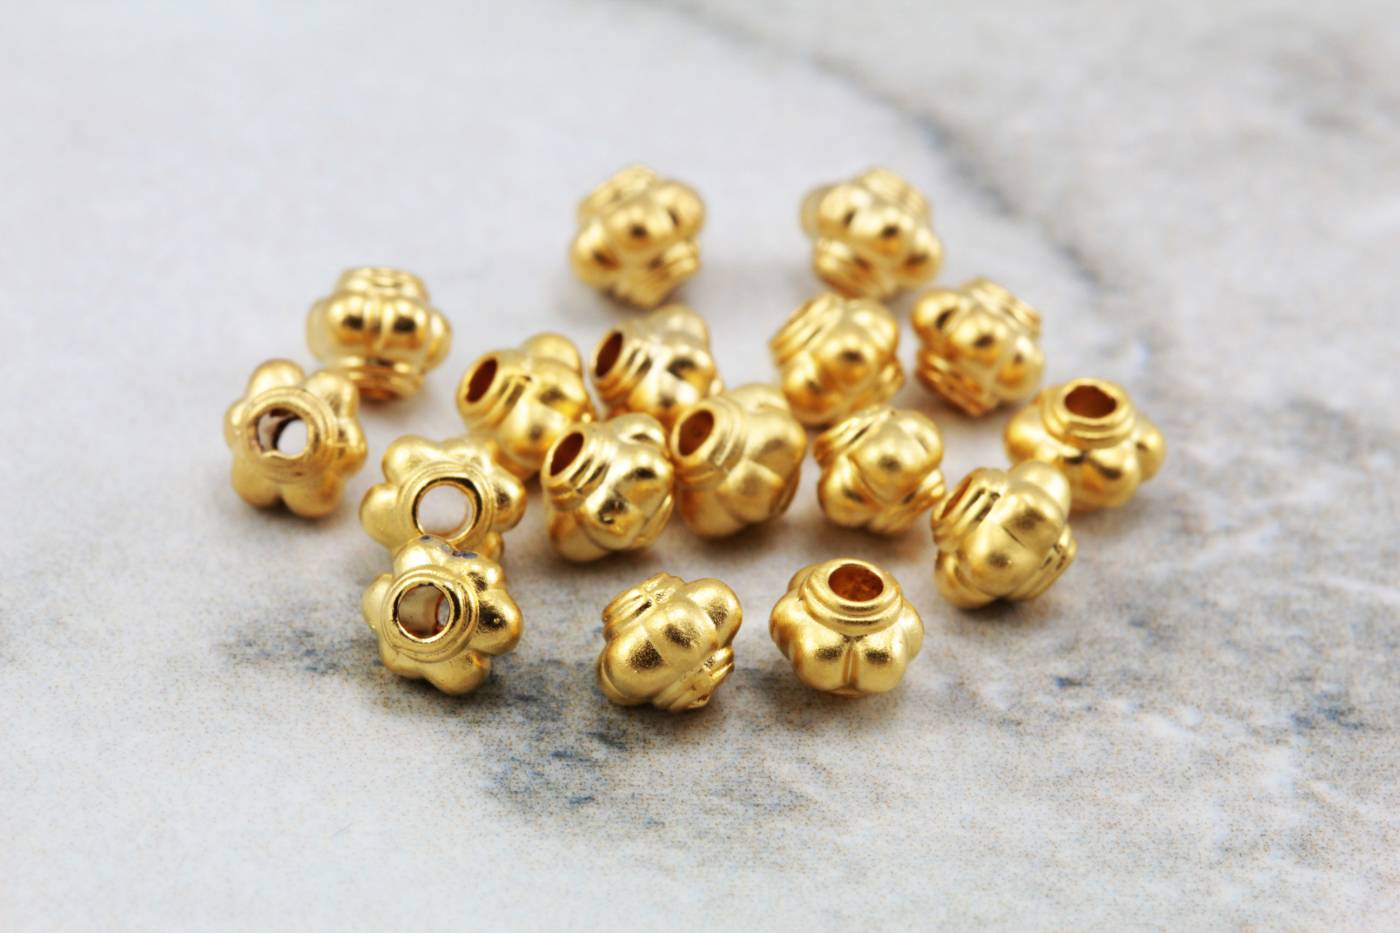 gold-plate-round-5mm-spacer-bead-finding